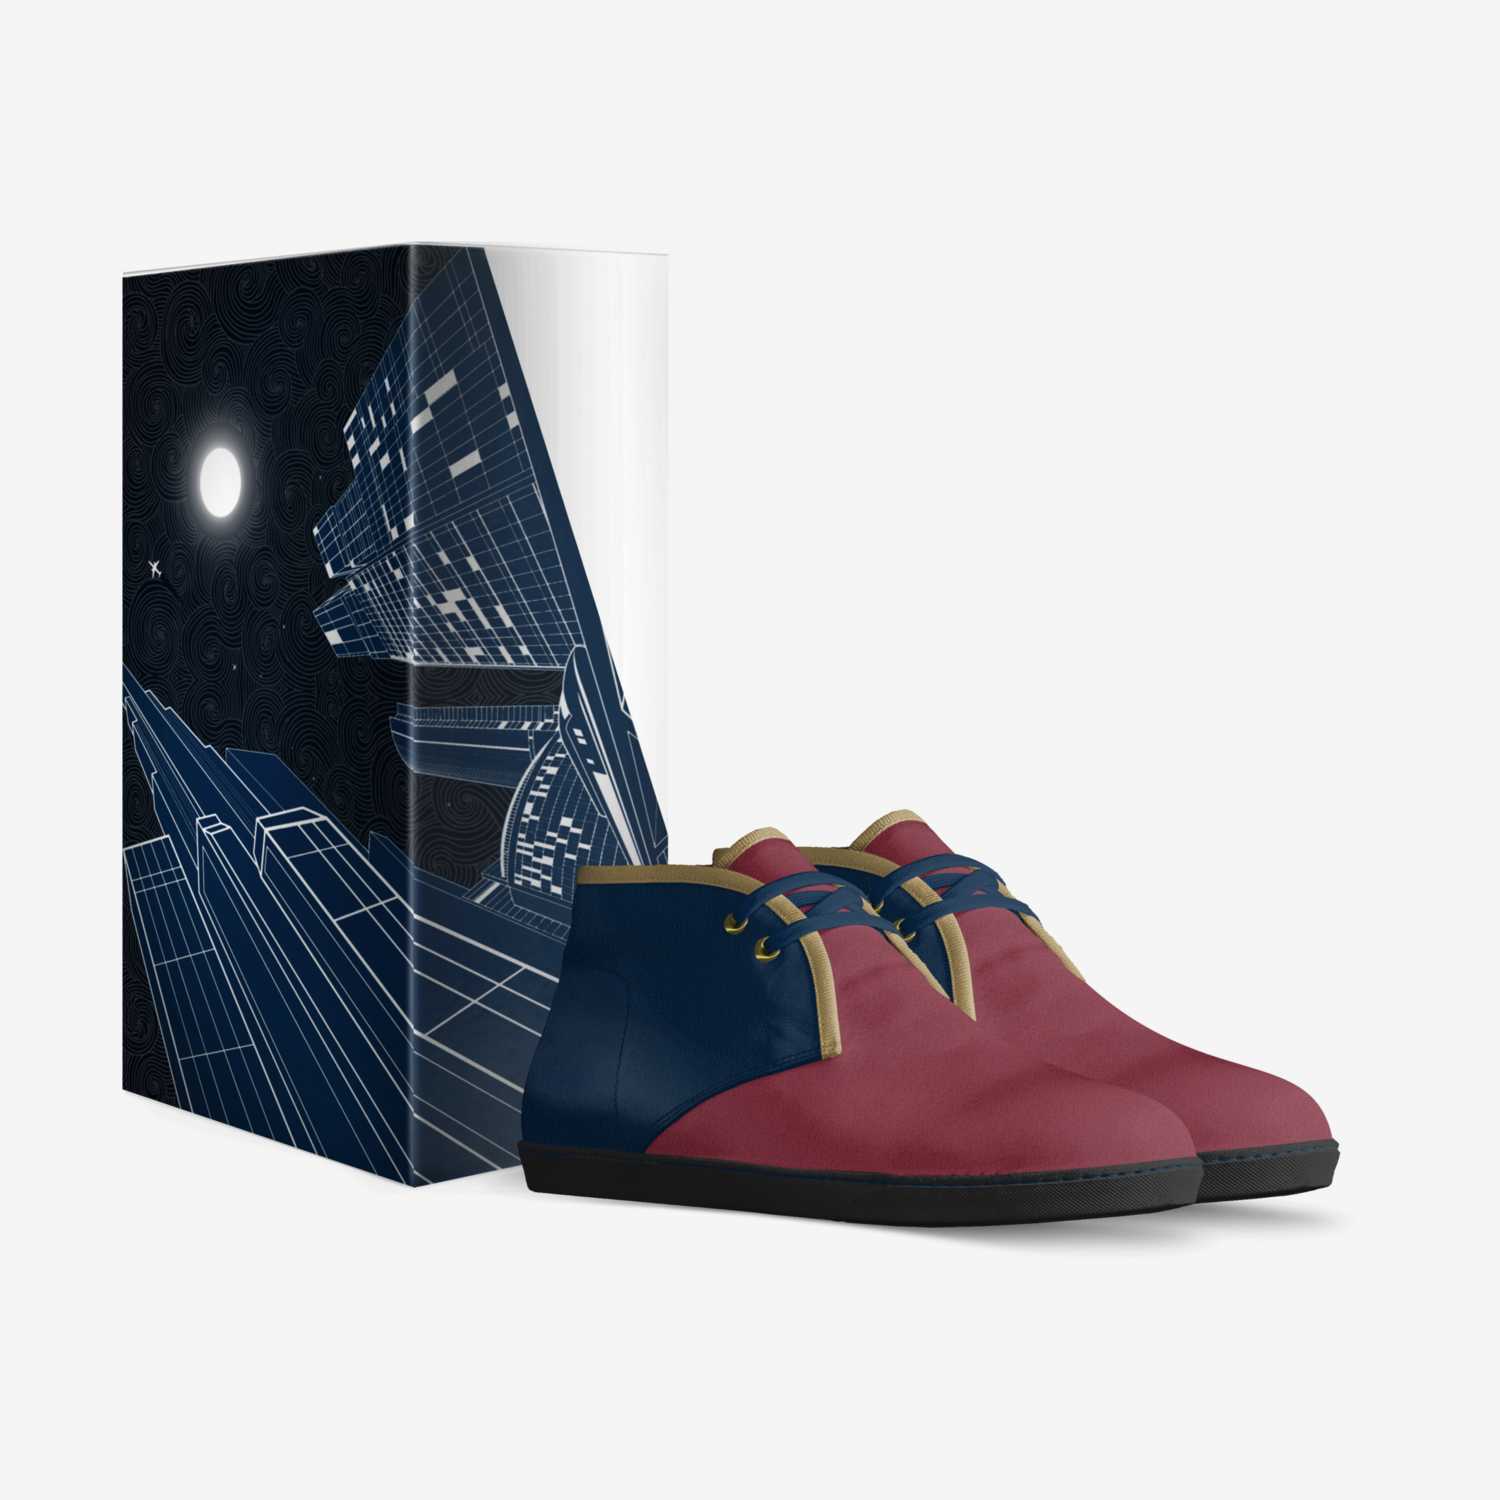 NightWalks custom made in Italy shoes by Wes Harris | Box view